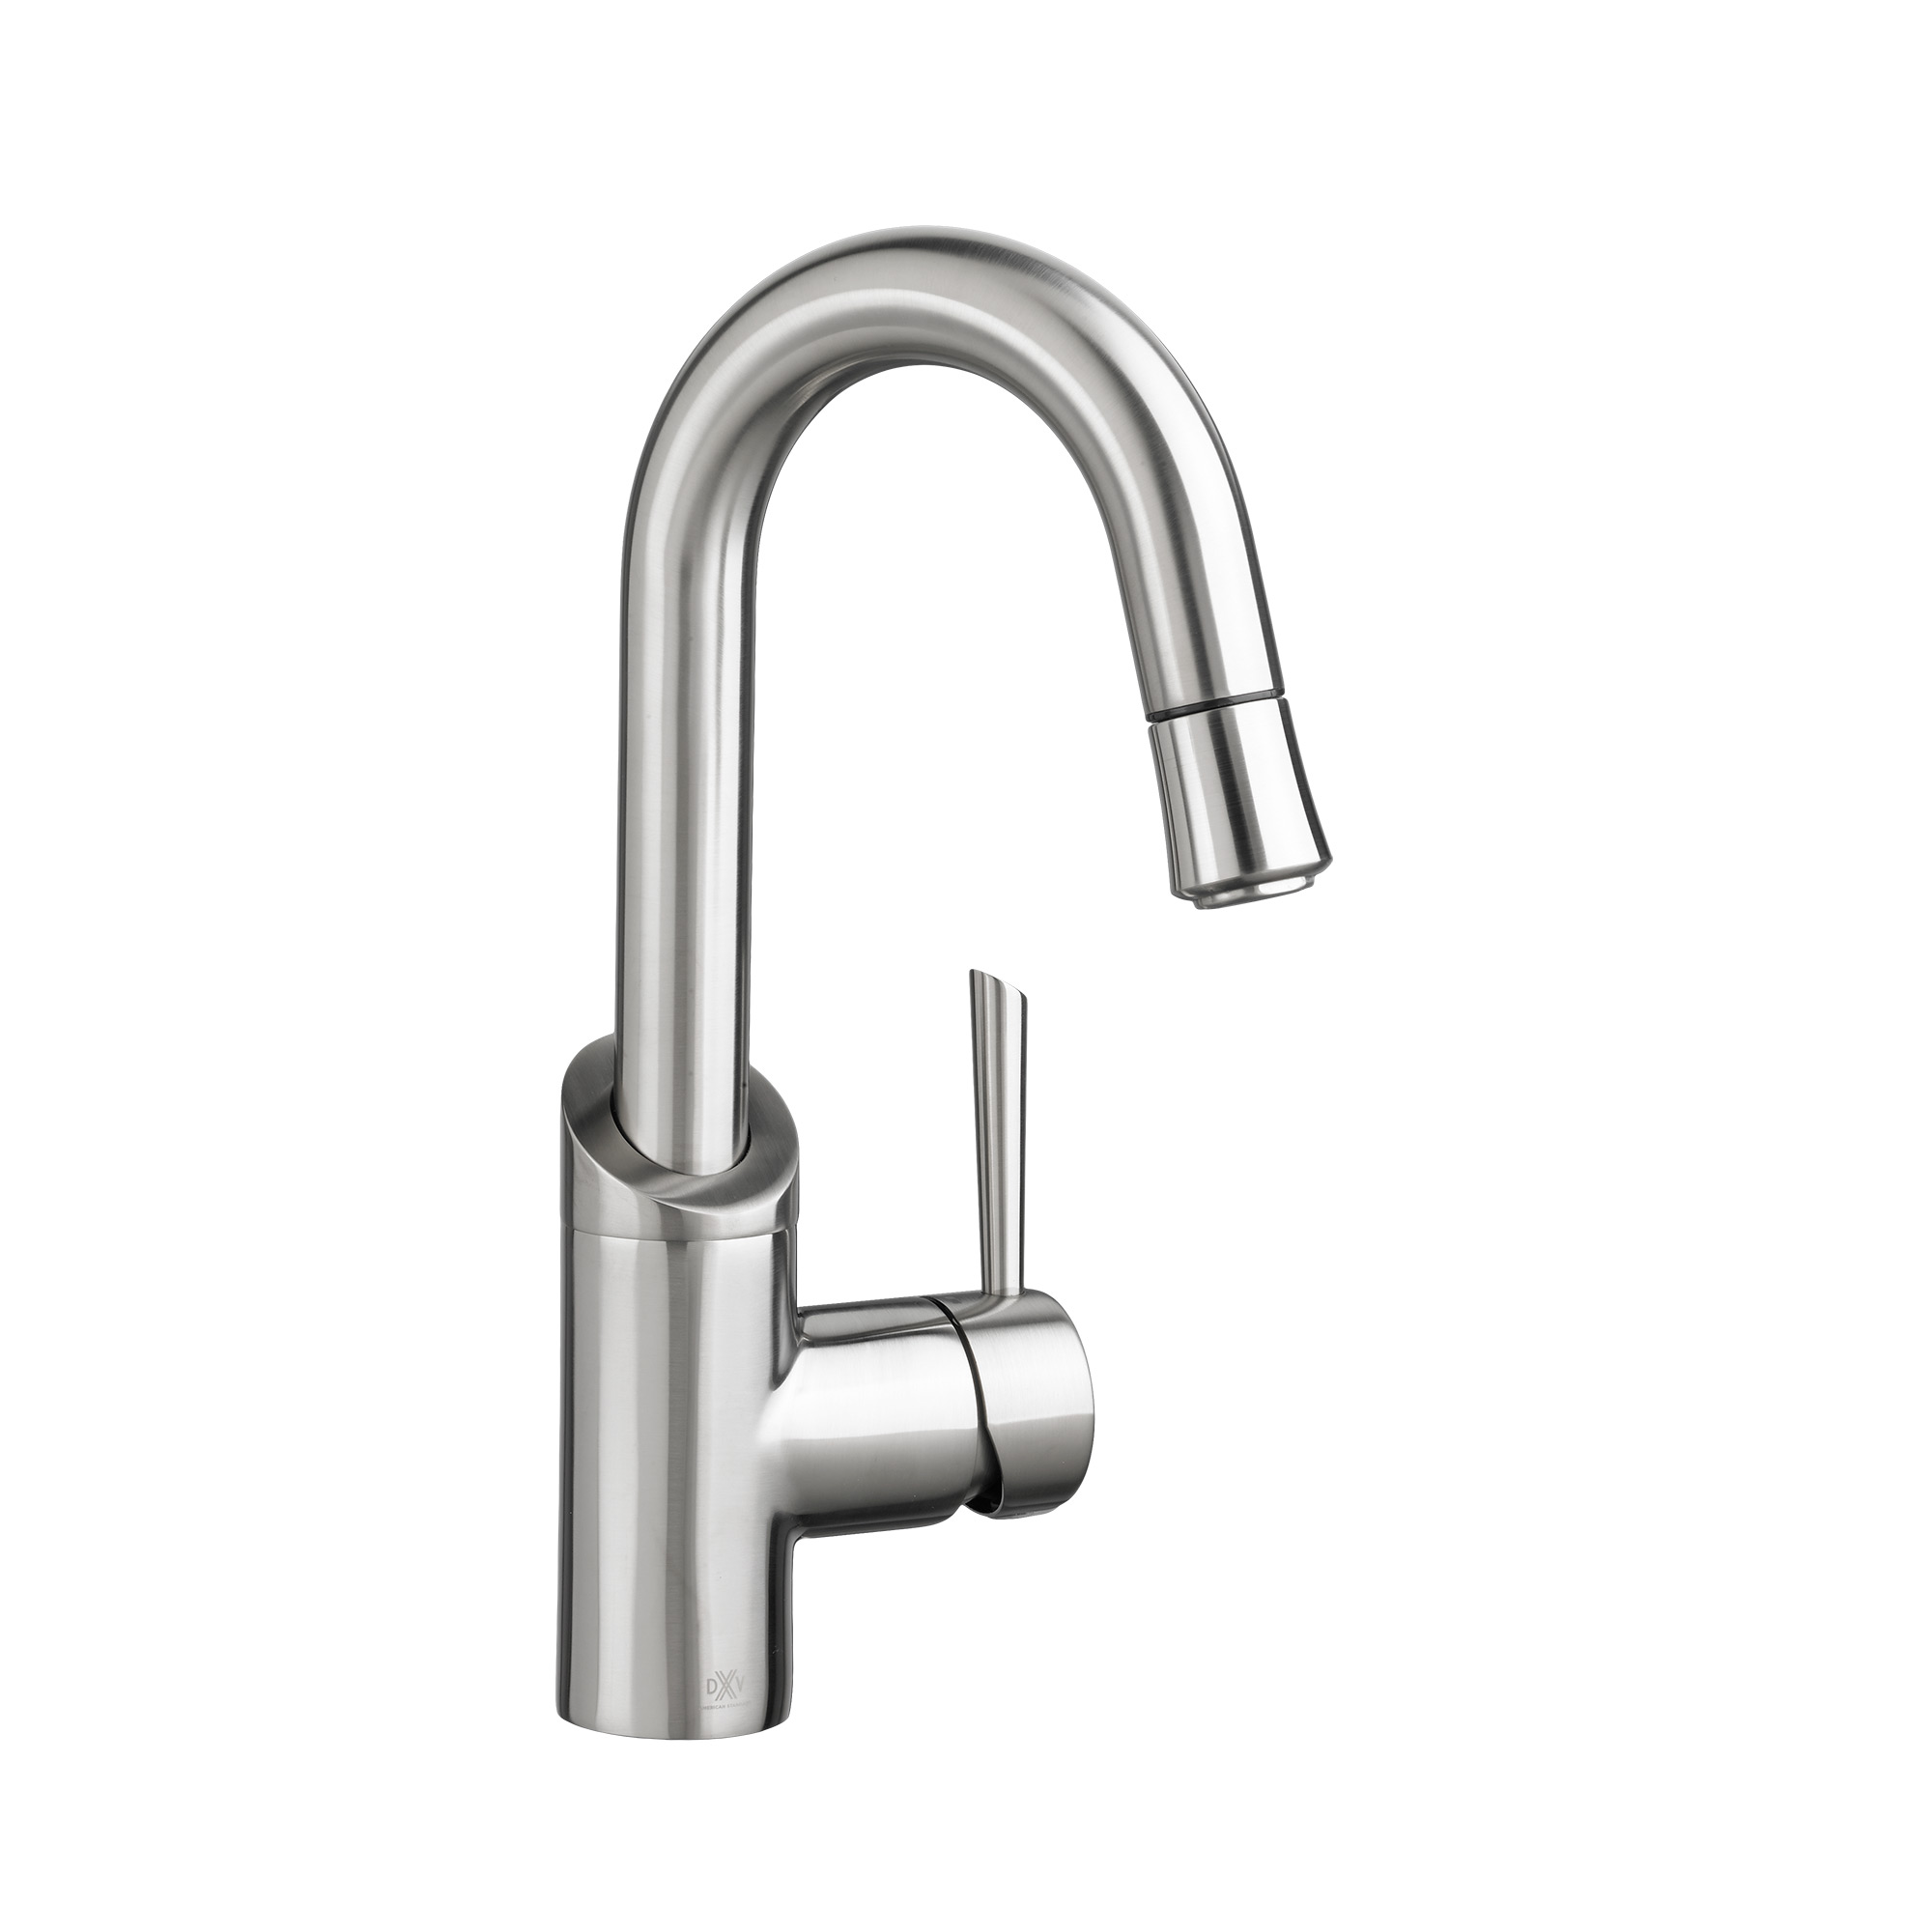 Fresno® Single Handle Bar Faucet with Lever Handle